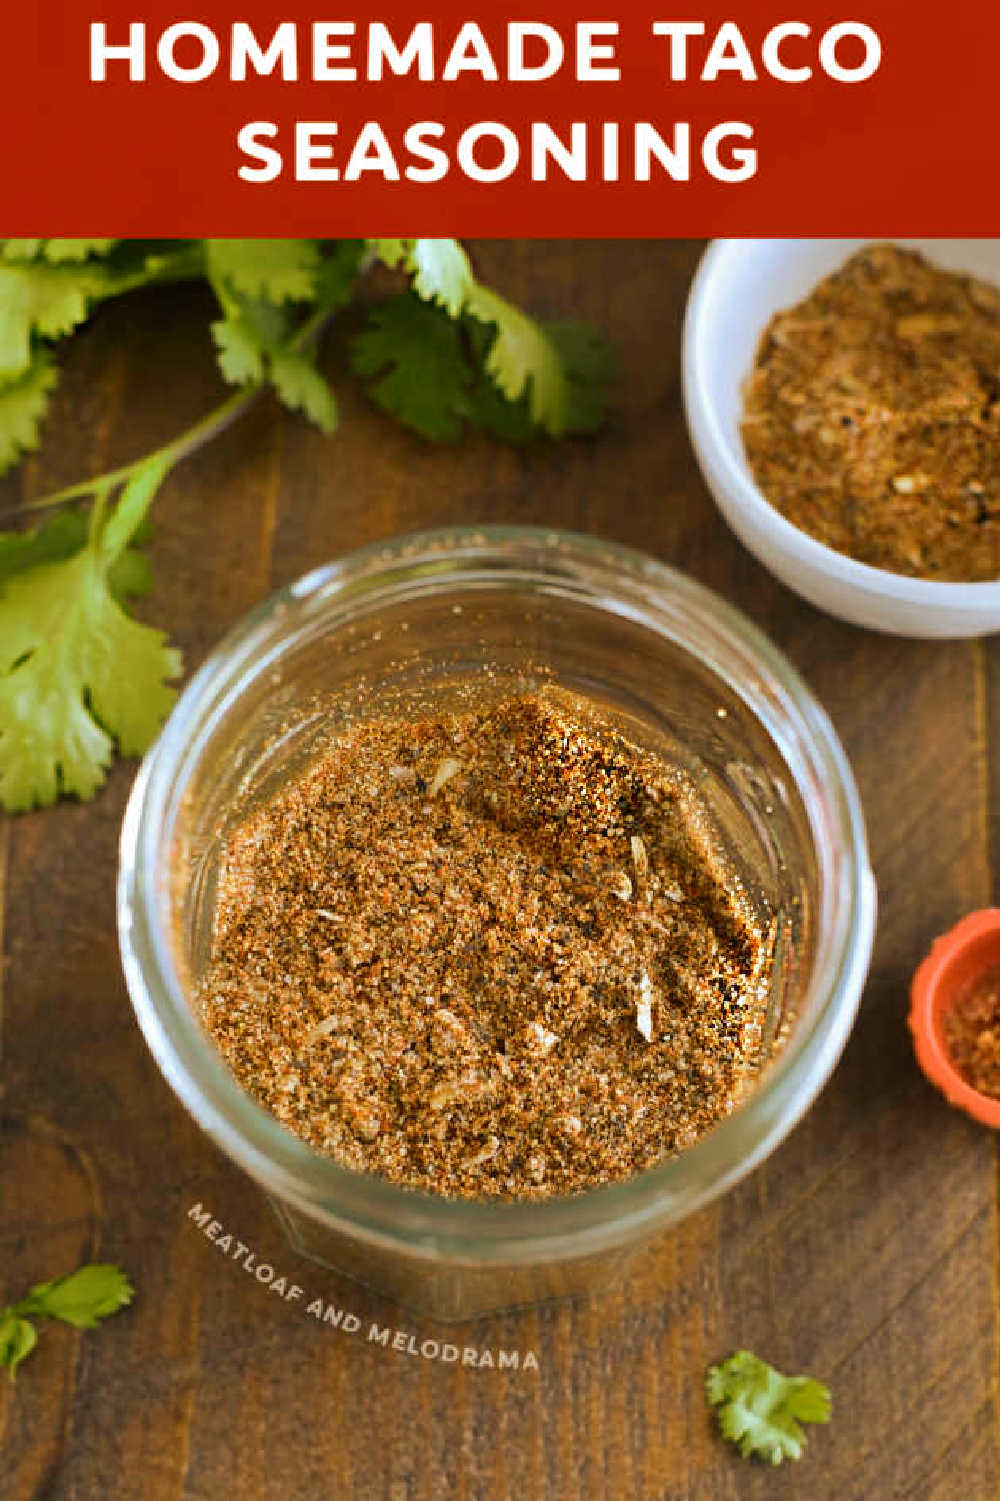 Learn how to make Homemade Taco Seasoning with this easy recipe using a mix of simple spices. Use this spice blend in your favorite Mexican recipes! So much cheaper and better than store-bought packets!  via @meamel